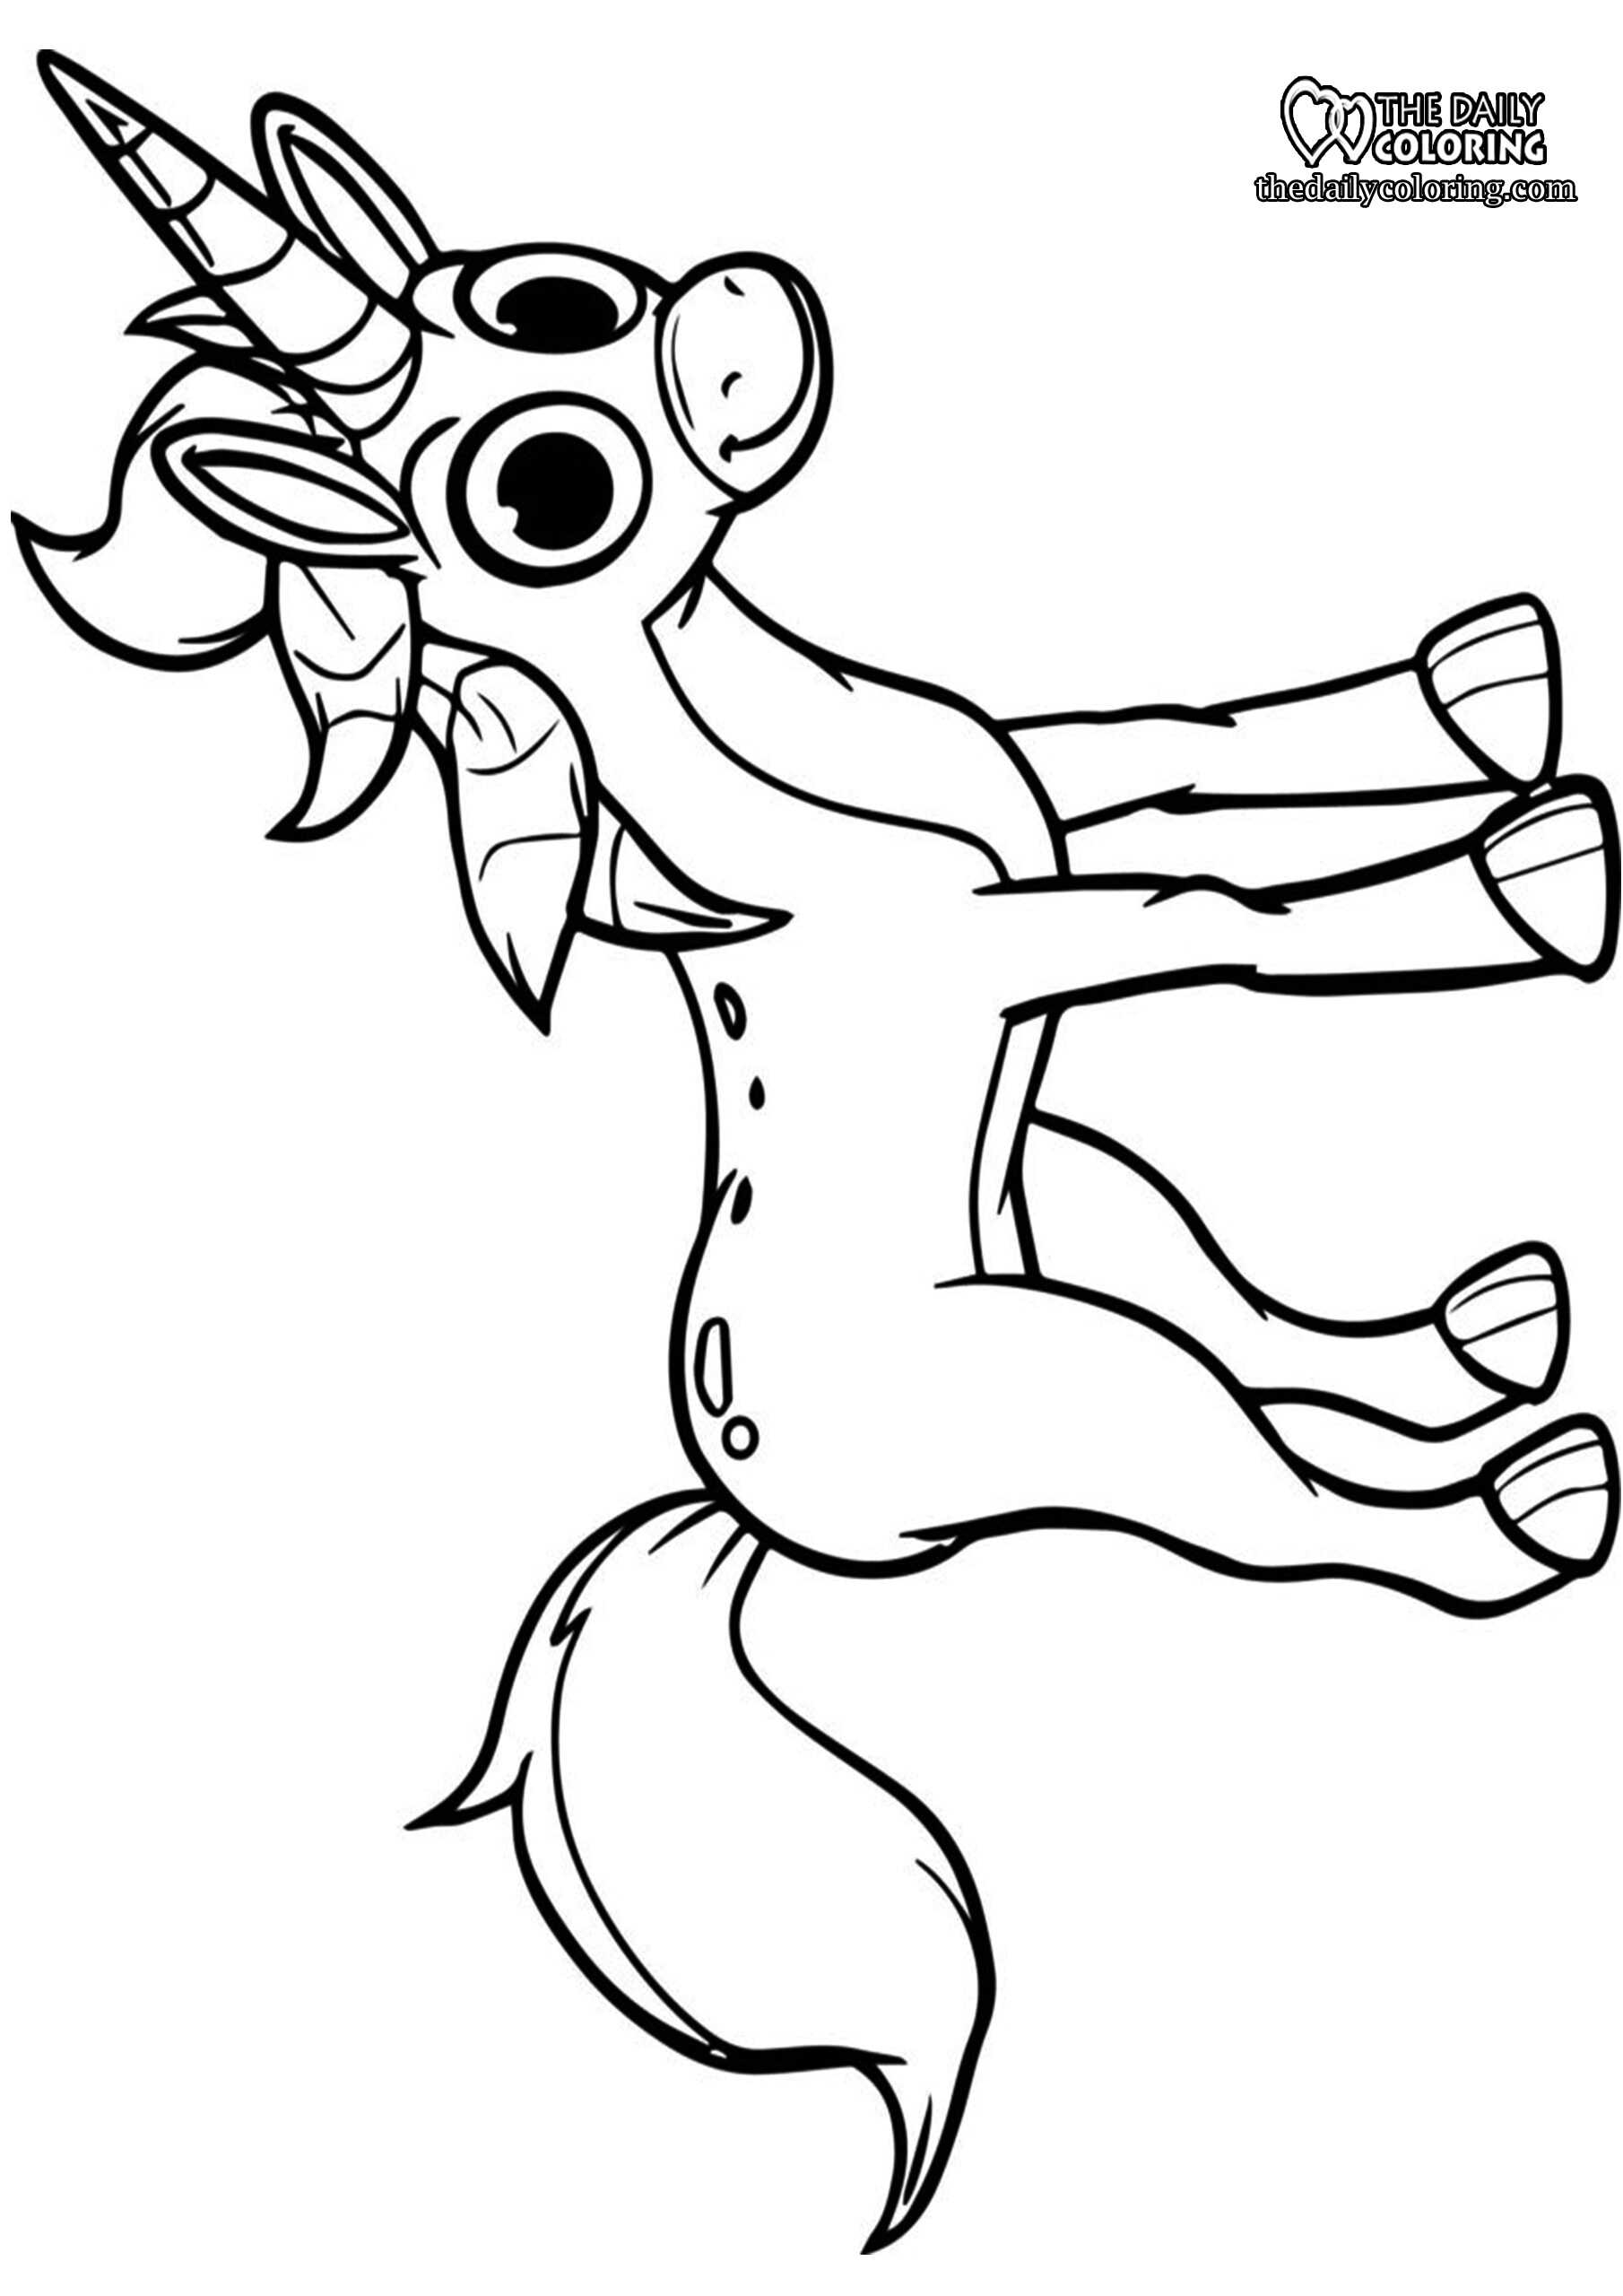 unicorn-coloring-page